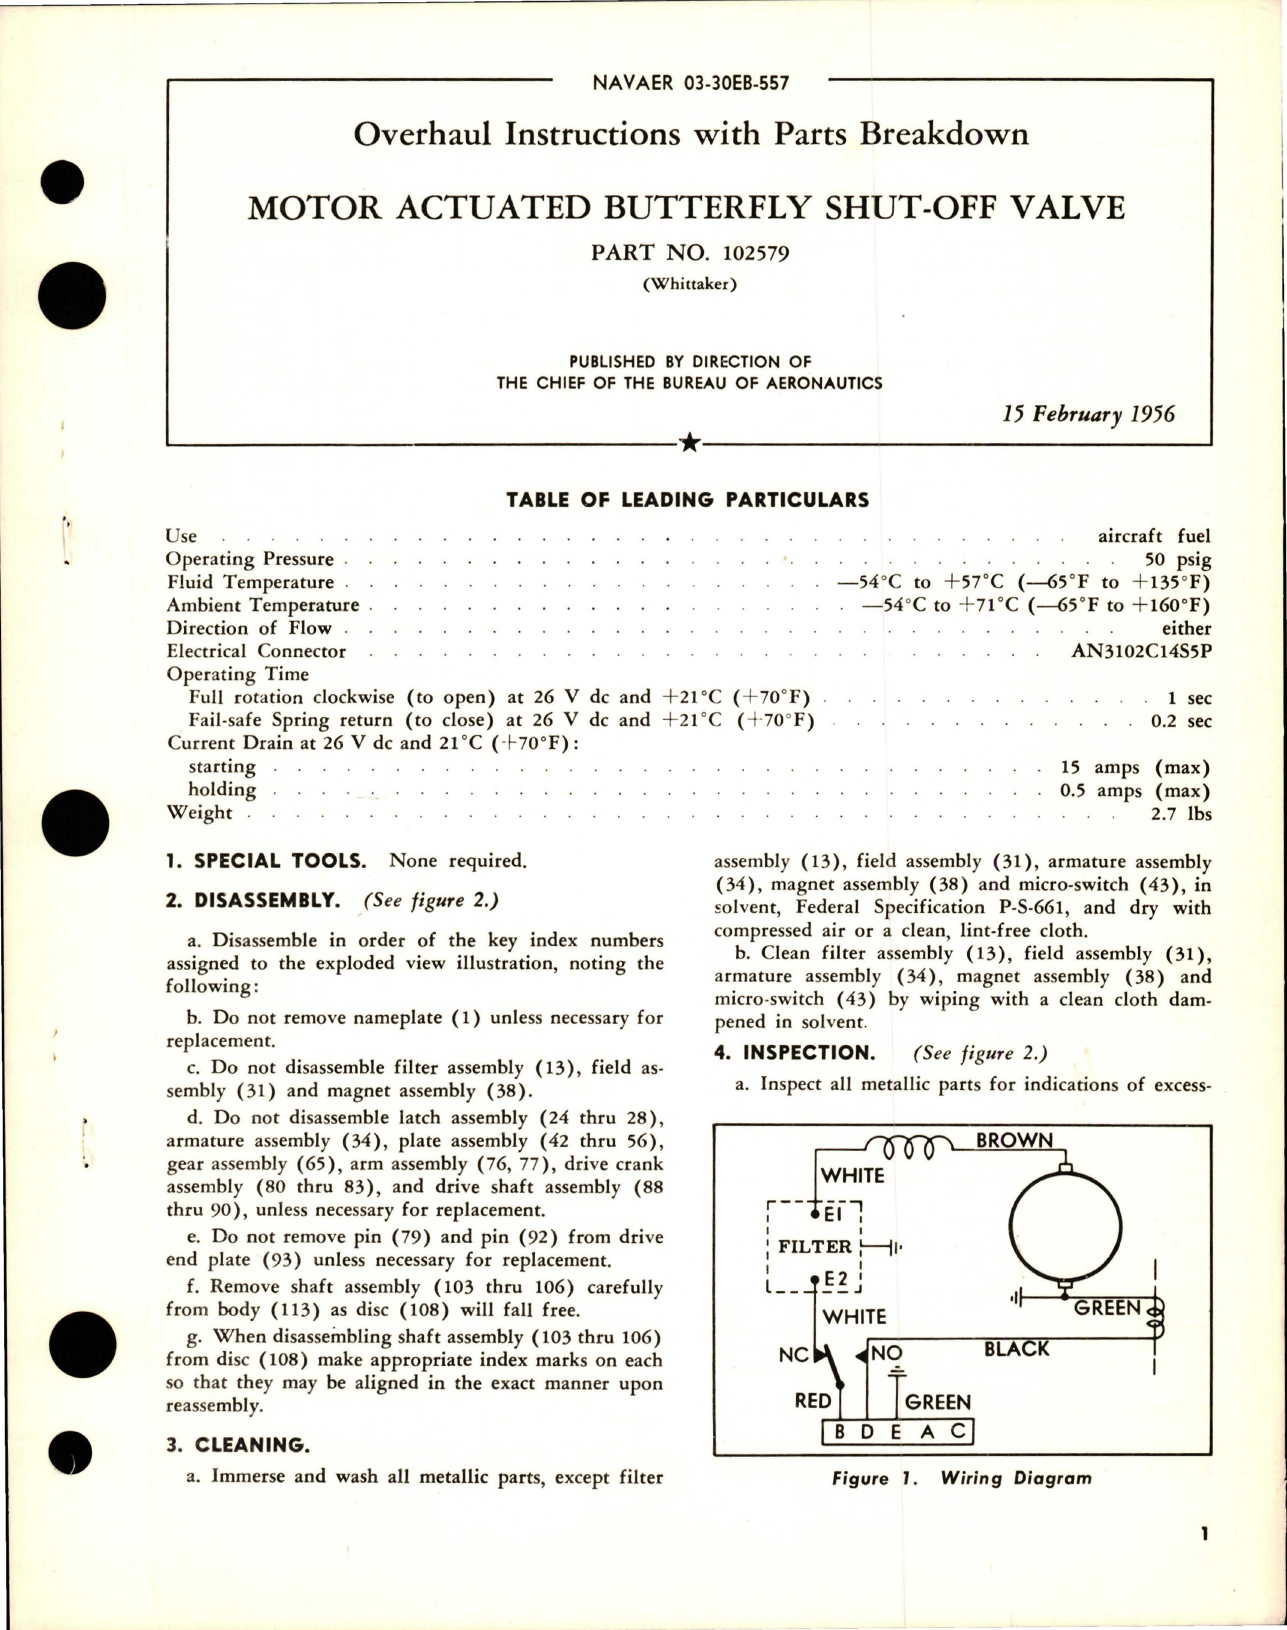 Sample page 1 from AirCorps Library document: Overhaul Instructions with Parts for Motor Actuated Butterfly Shut Off Valve - Part 102579